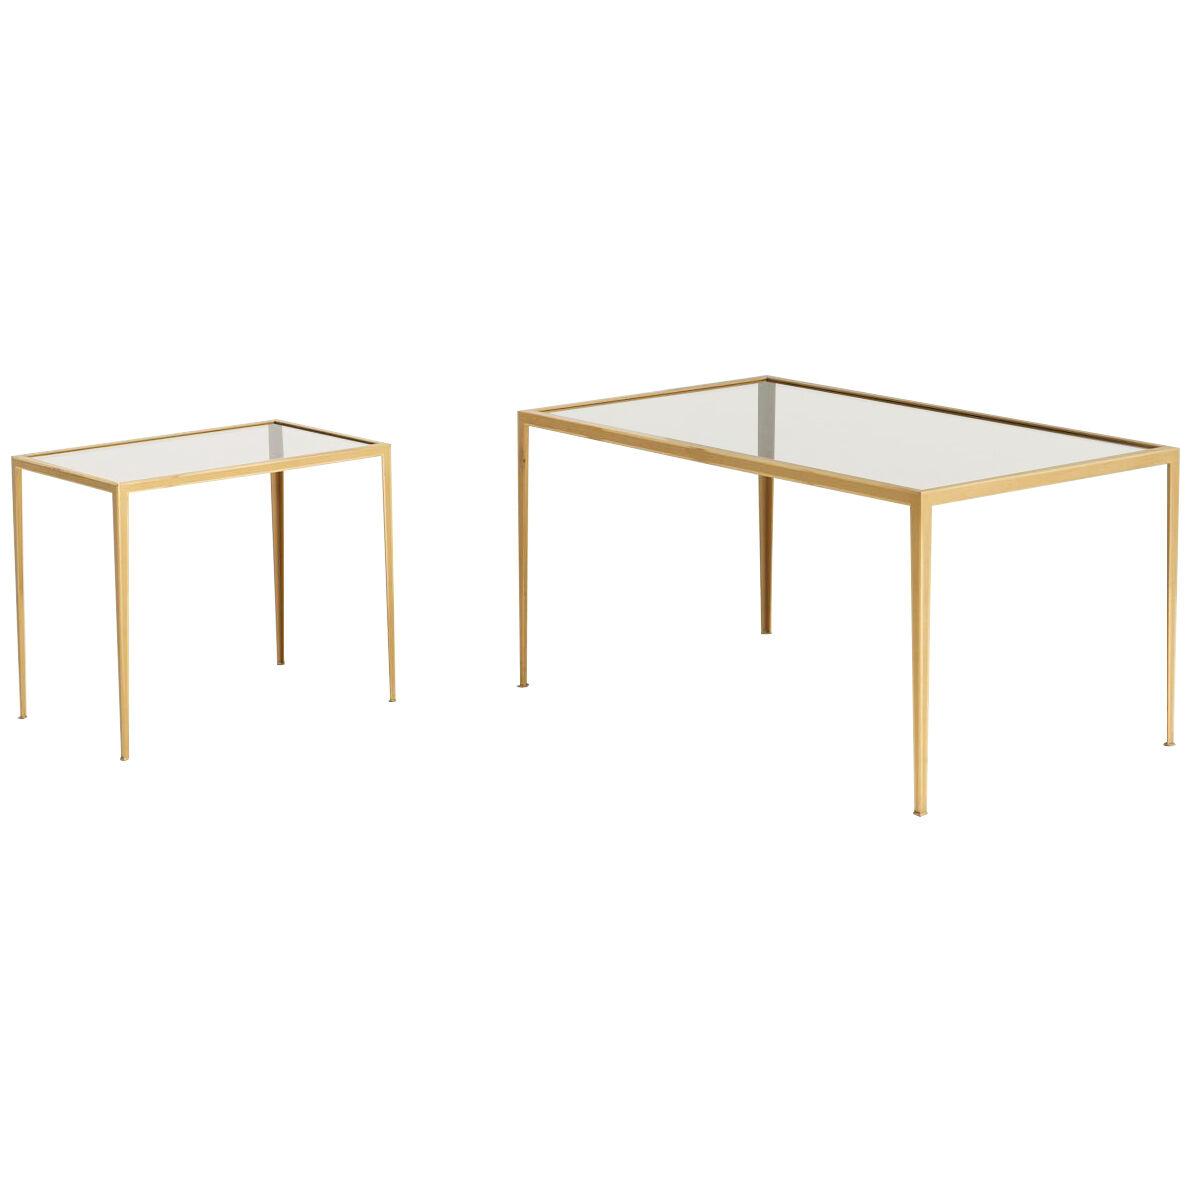 Set of 2 Side Tables in Glass, Germany - 1960's